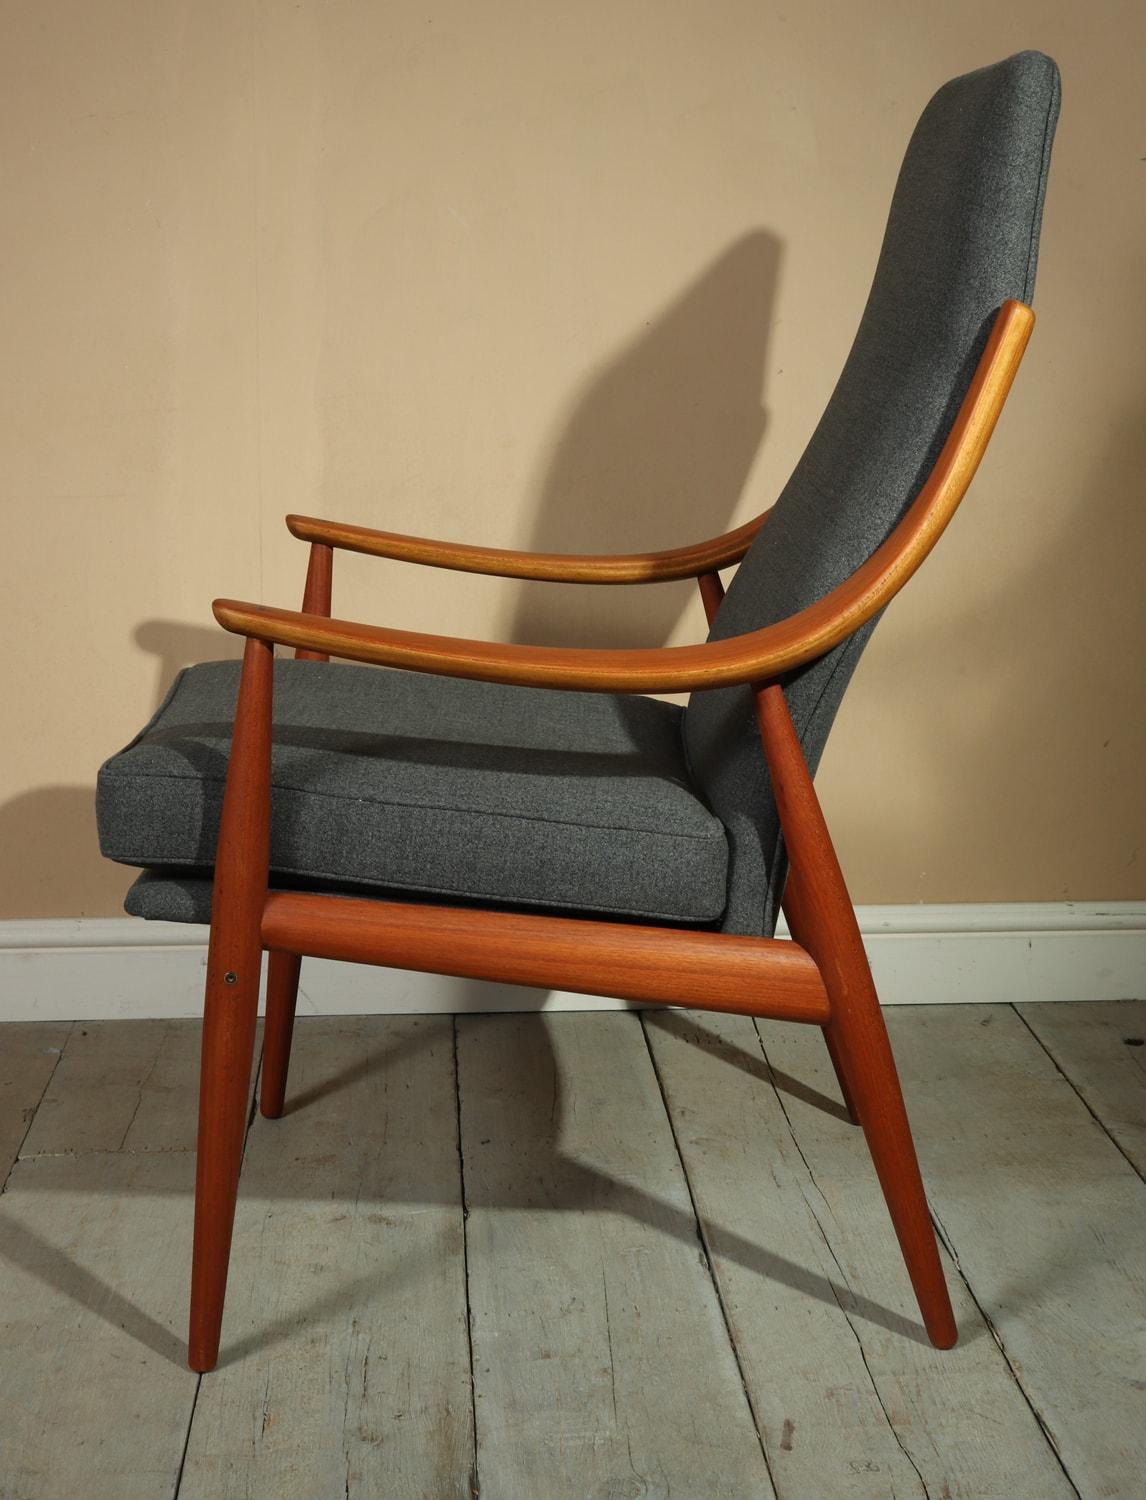 Mid-20th Century Teak Chair Model 148 by Peter Hvidt Fo France and SonTeak Chair Model 148 For Sale